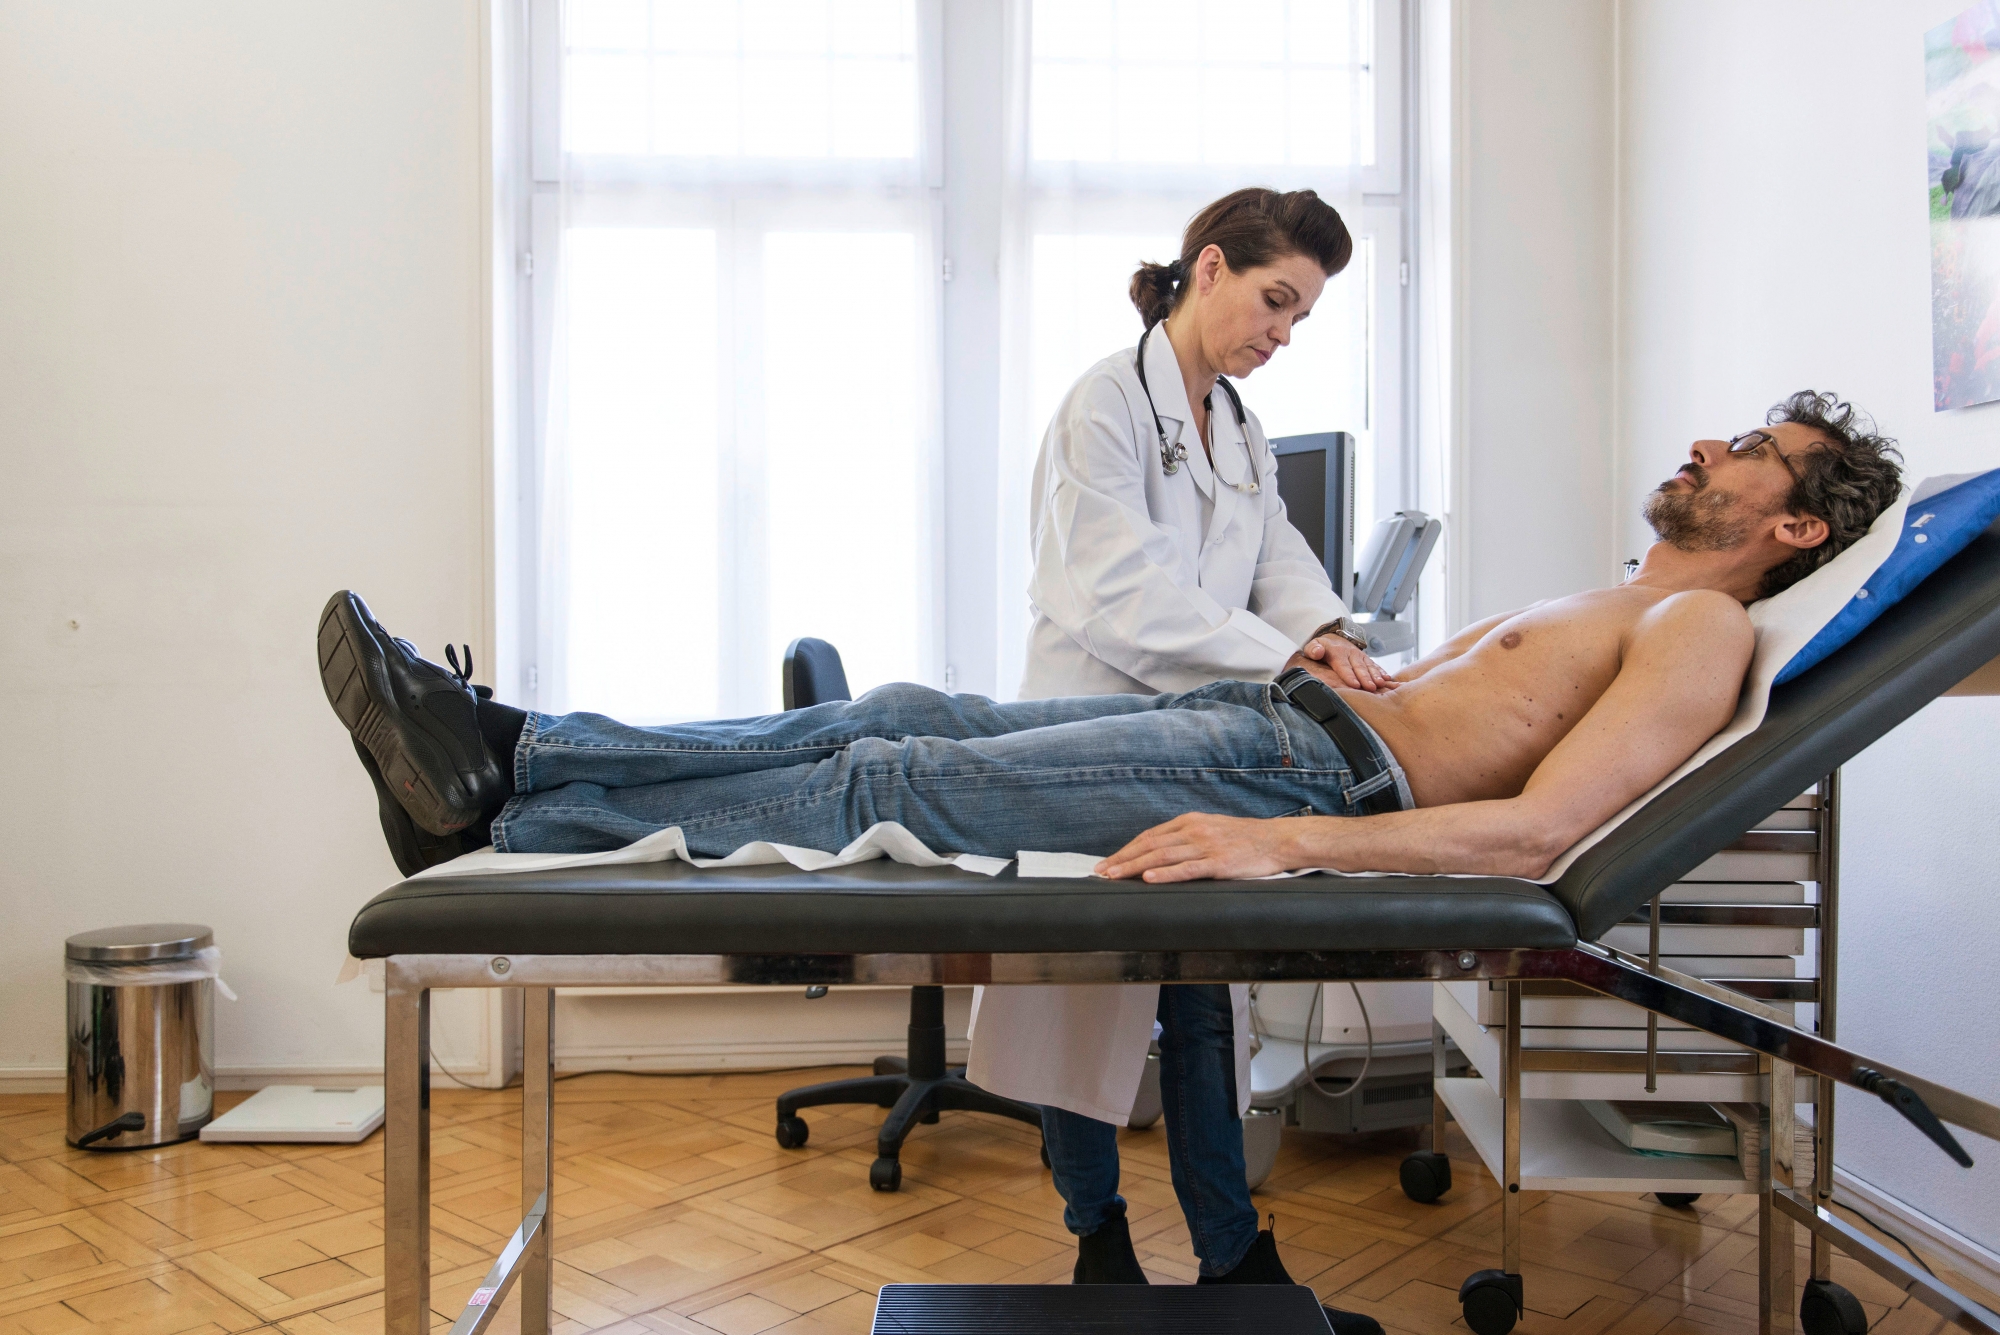 [EDITORS NOTE: POSED PICTURE] A doctor makes an abdomen examination on a patient, pictured on March 28, 2014. (KEYSTONE/Christian Beutler) SCHWEIZ HAUSARZT